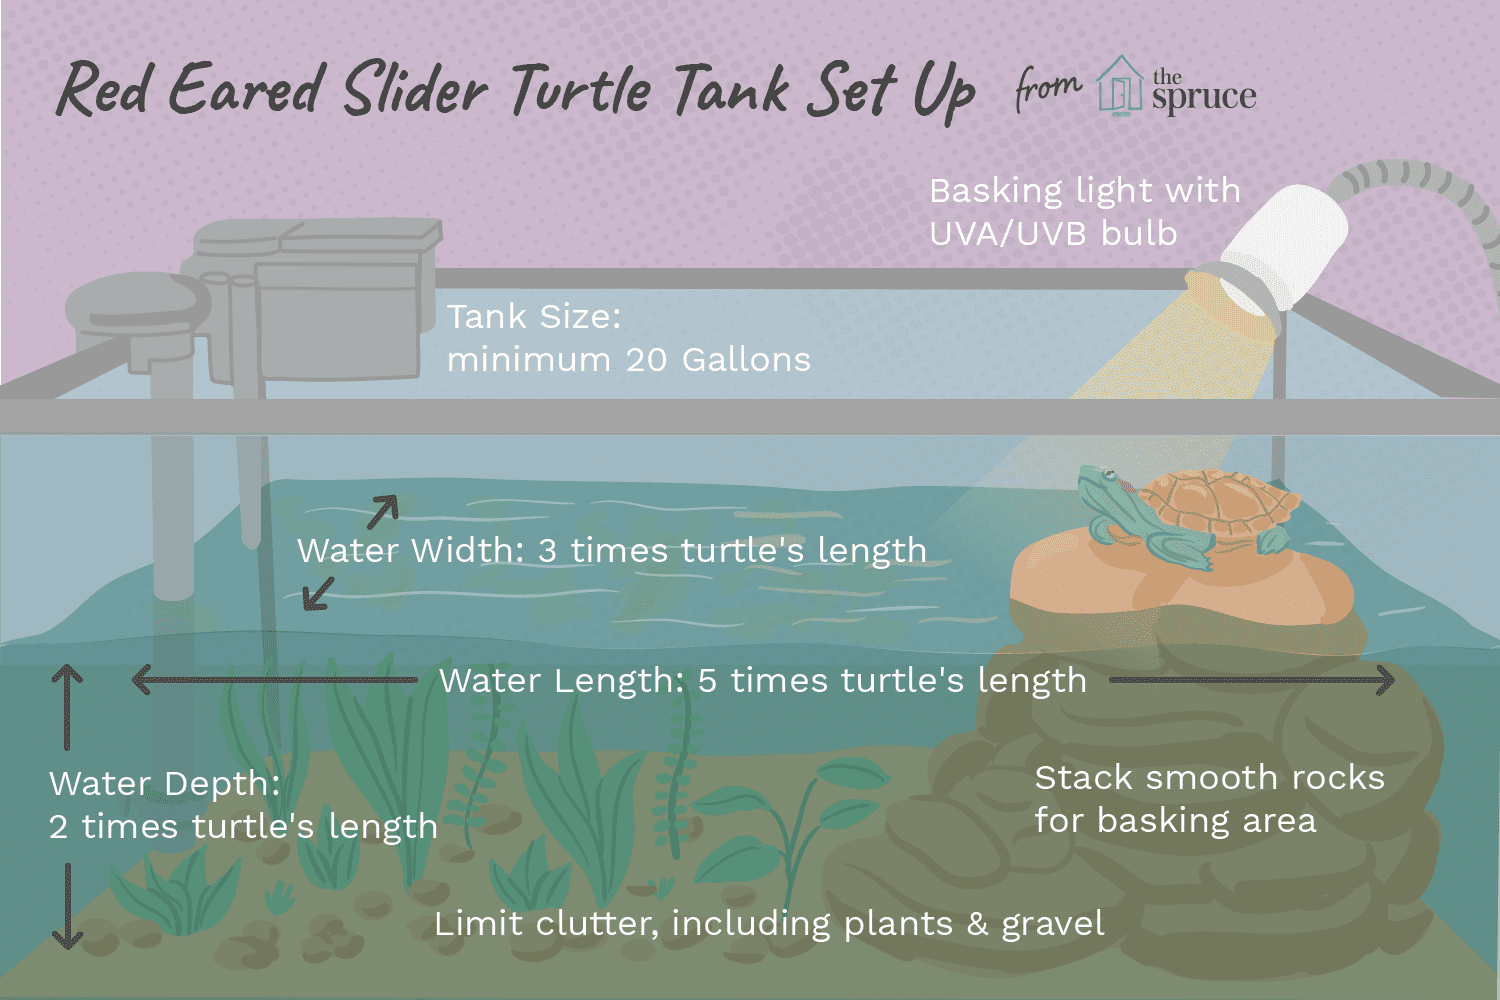 What Temperature Should a Turtle Tank Be